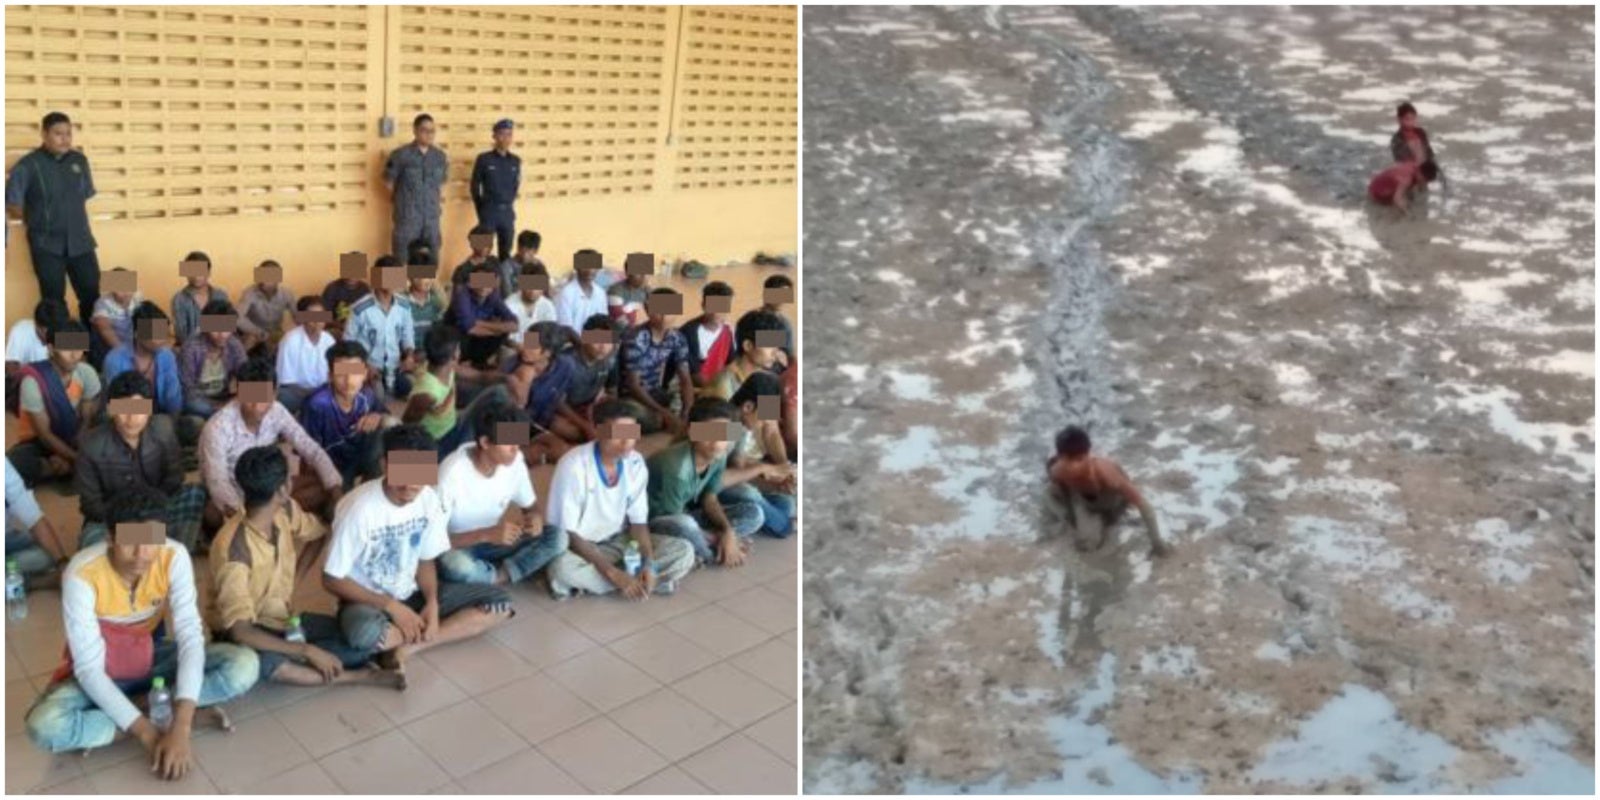 250 Rohingya Refugees Docked at Langkawi This Morning, Netizens Extremely Angry - WORLD OF BUZZ 1